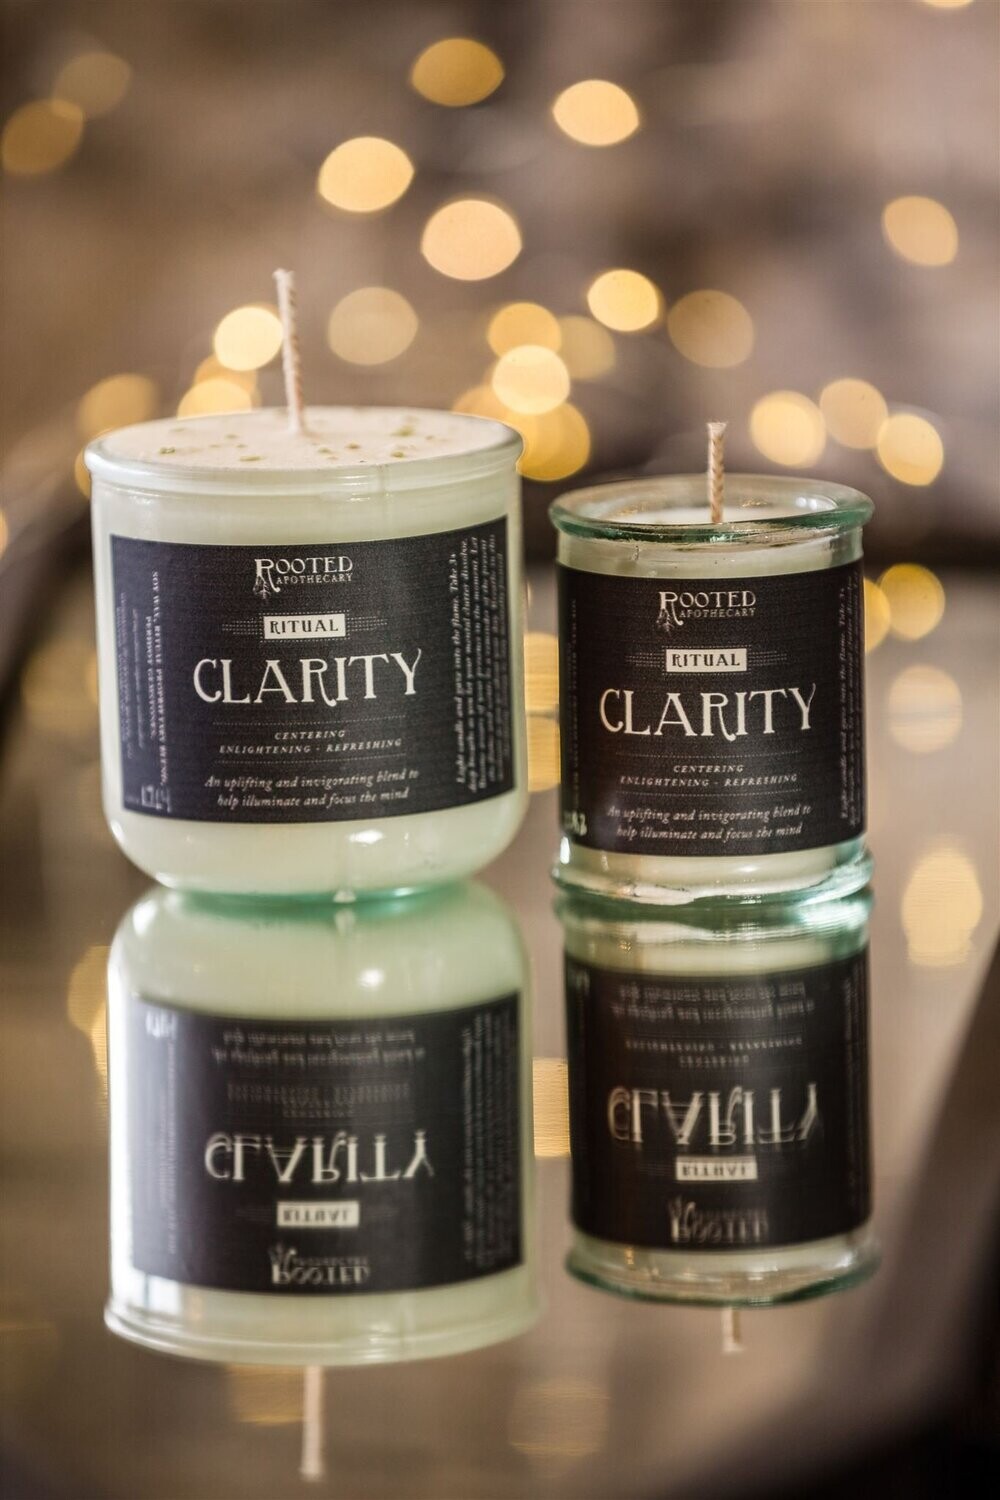 Clarity Ritual Candle, Size: 10 ounce